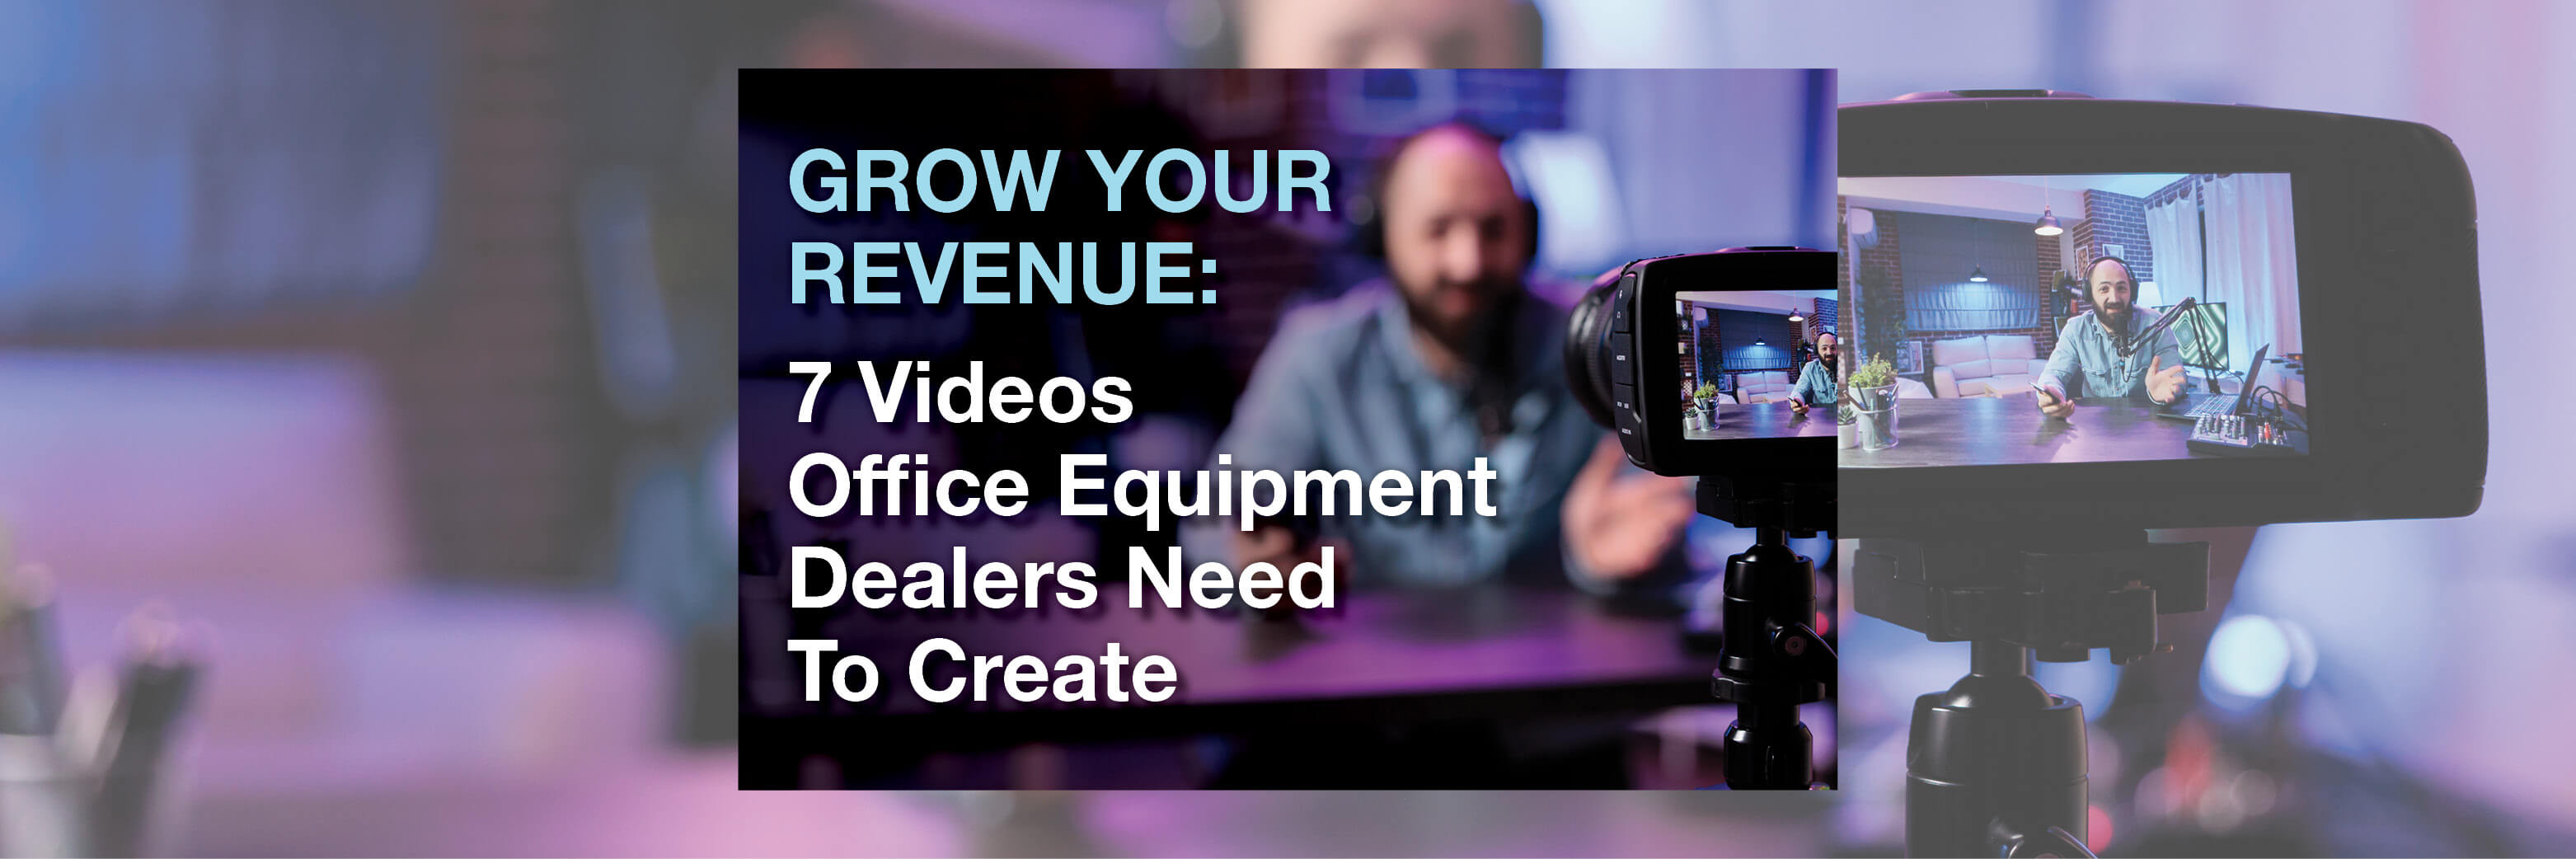 Grow Your Revenue: 7 Videos Office Equipment Dealers Need To Create